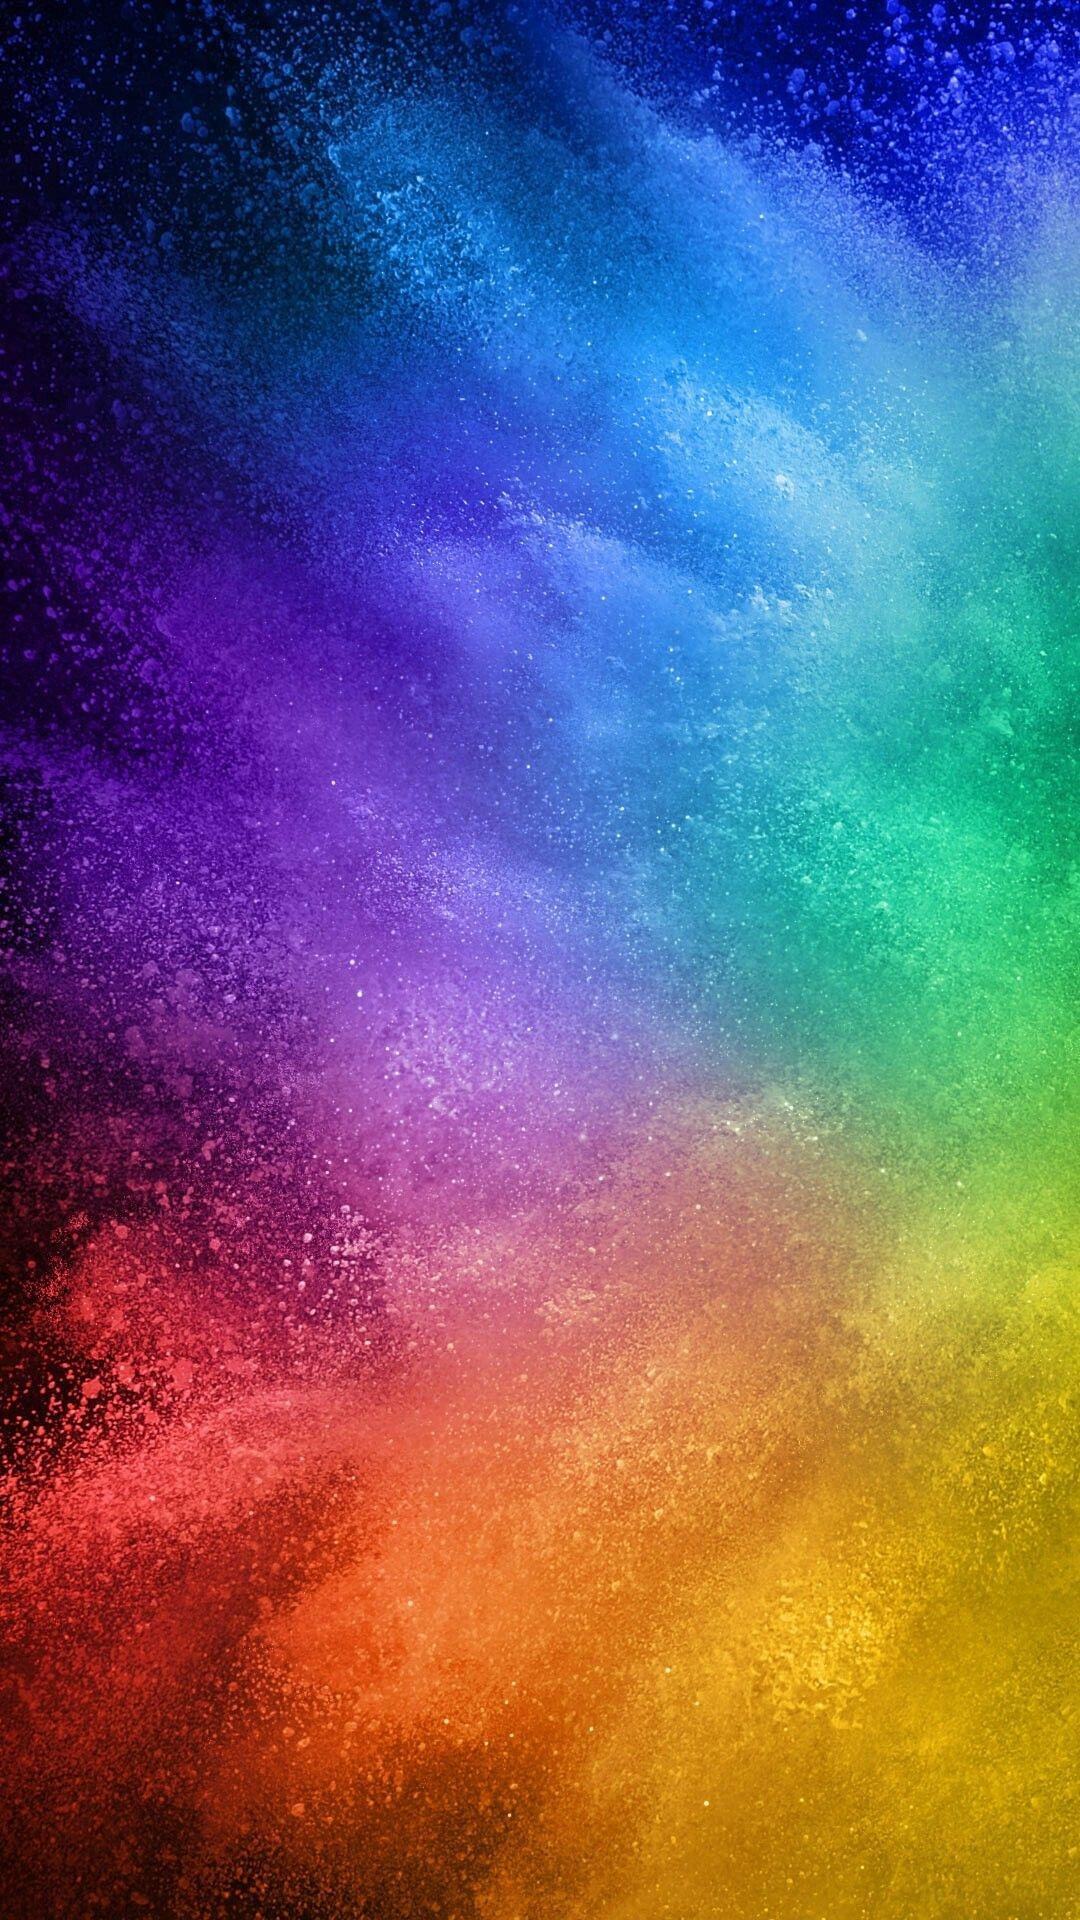 Color mixing 1080P, 2K, 4K, 5K HD wallpapers free download | Wallpaper Flare